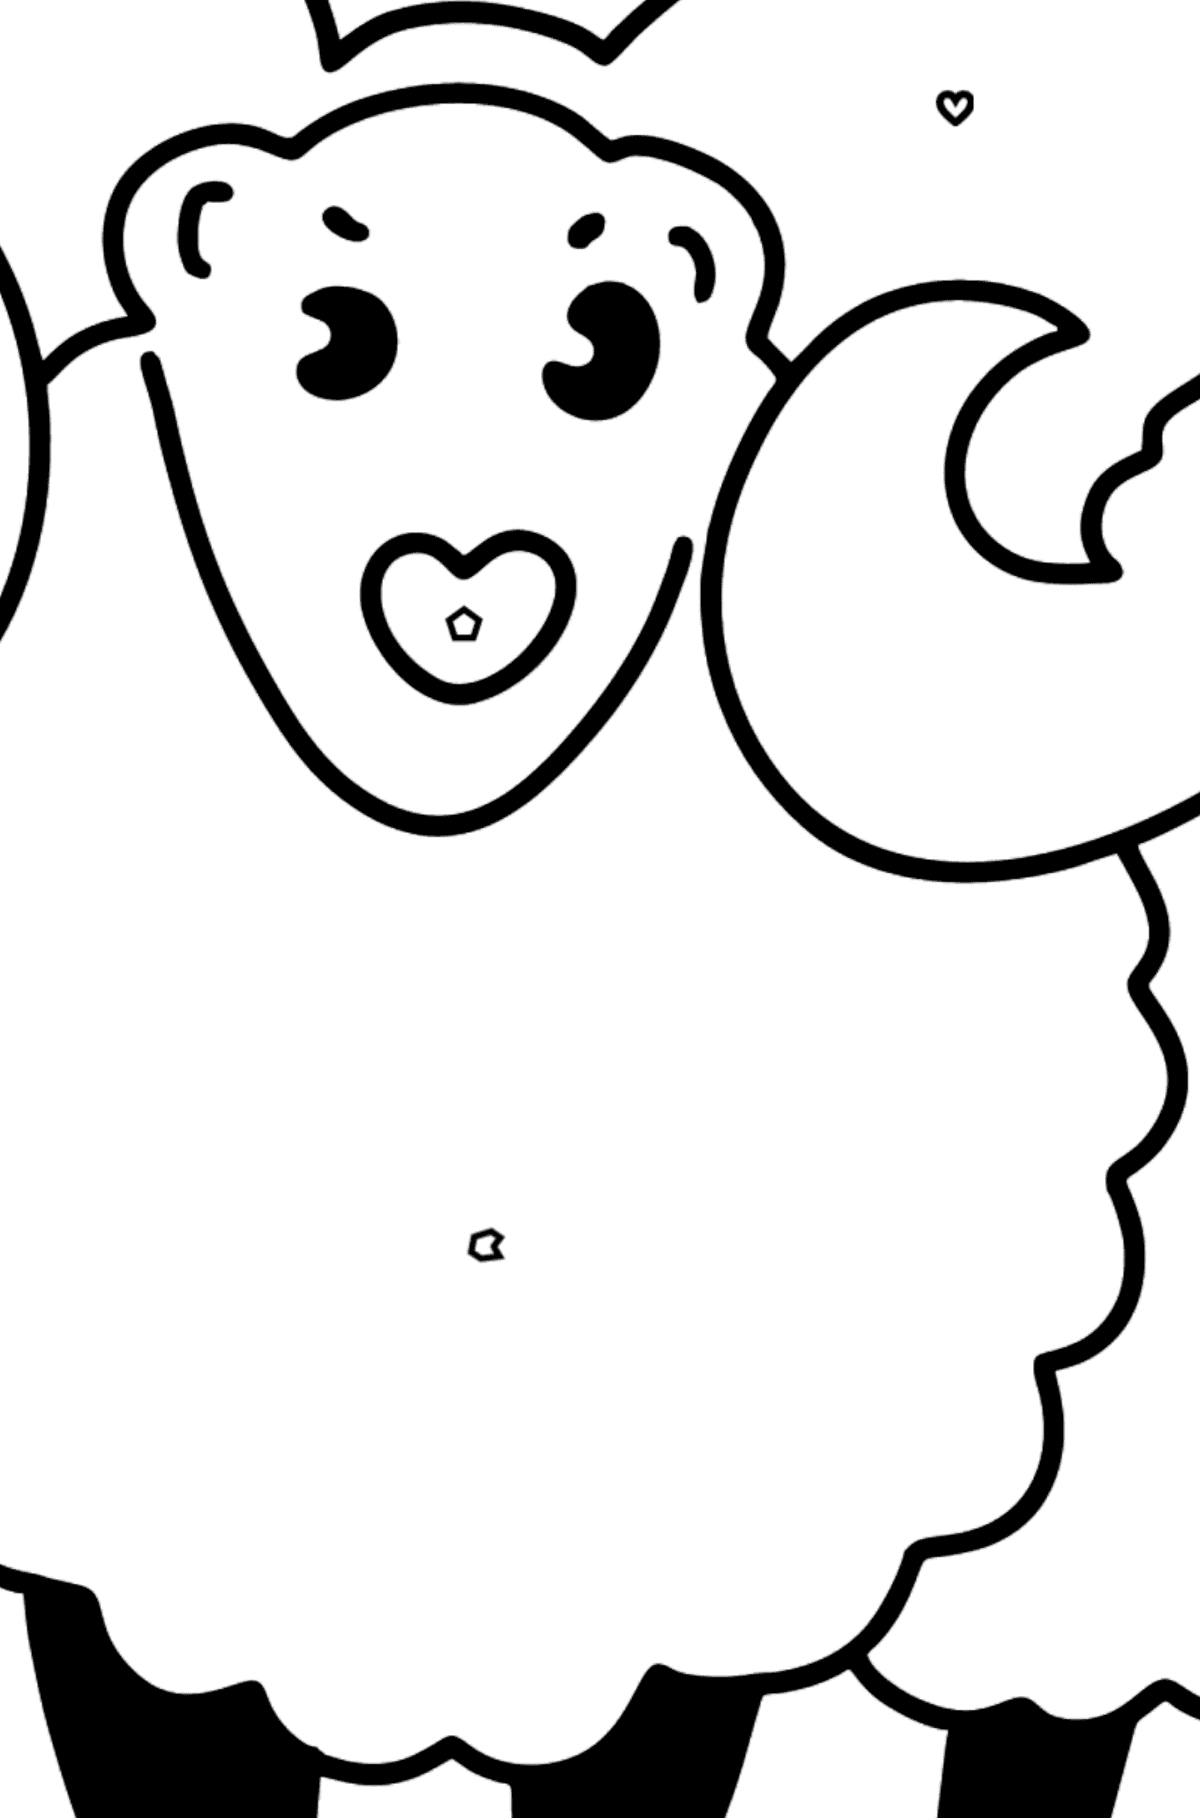 Home Lamb coloring page - Coloring by Geometric Shapes for Kids